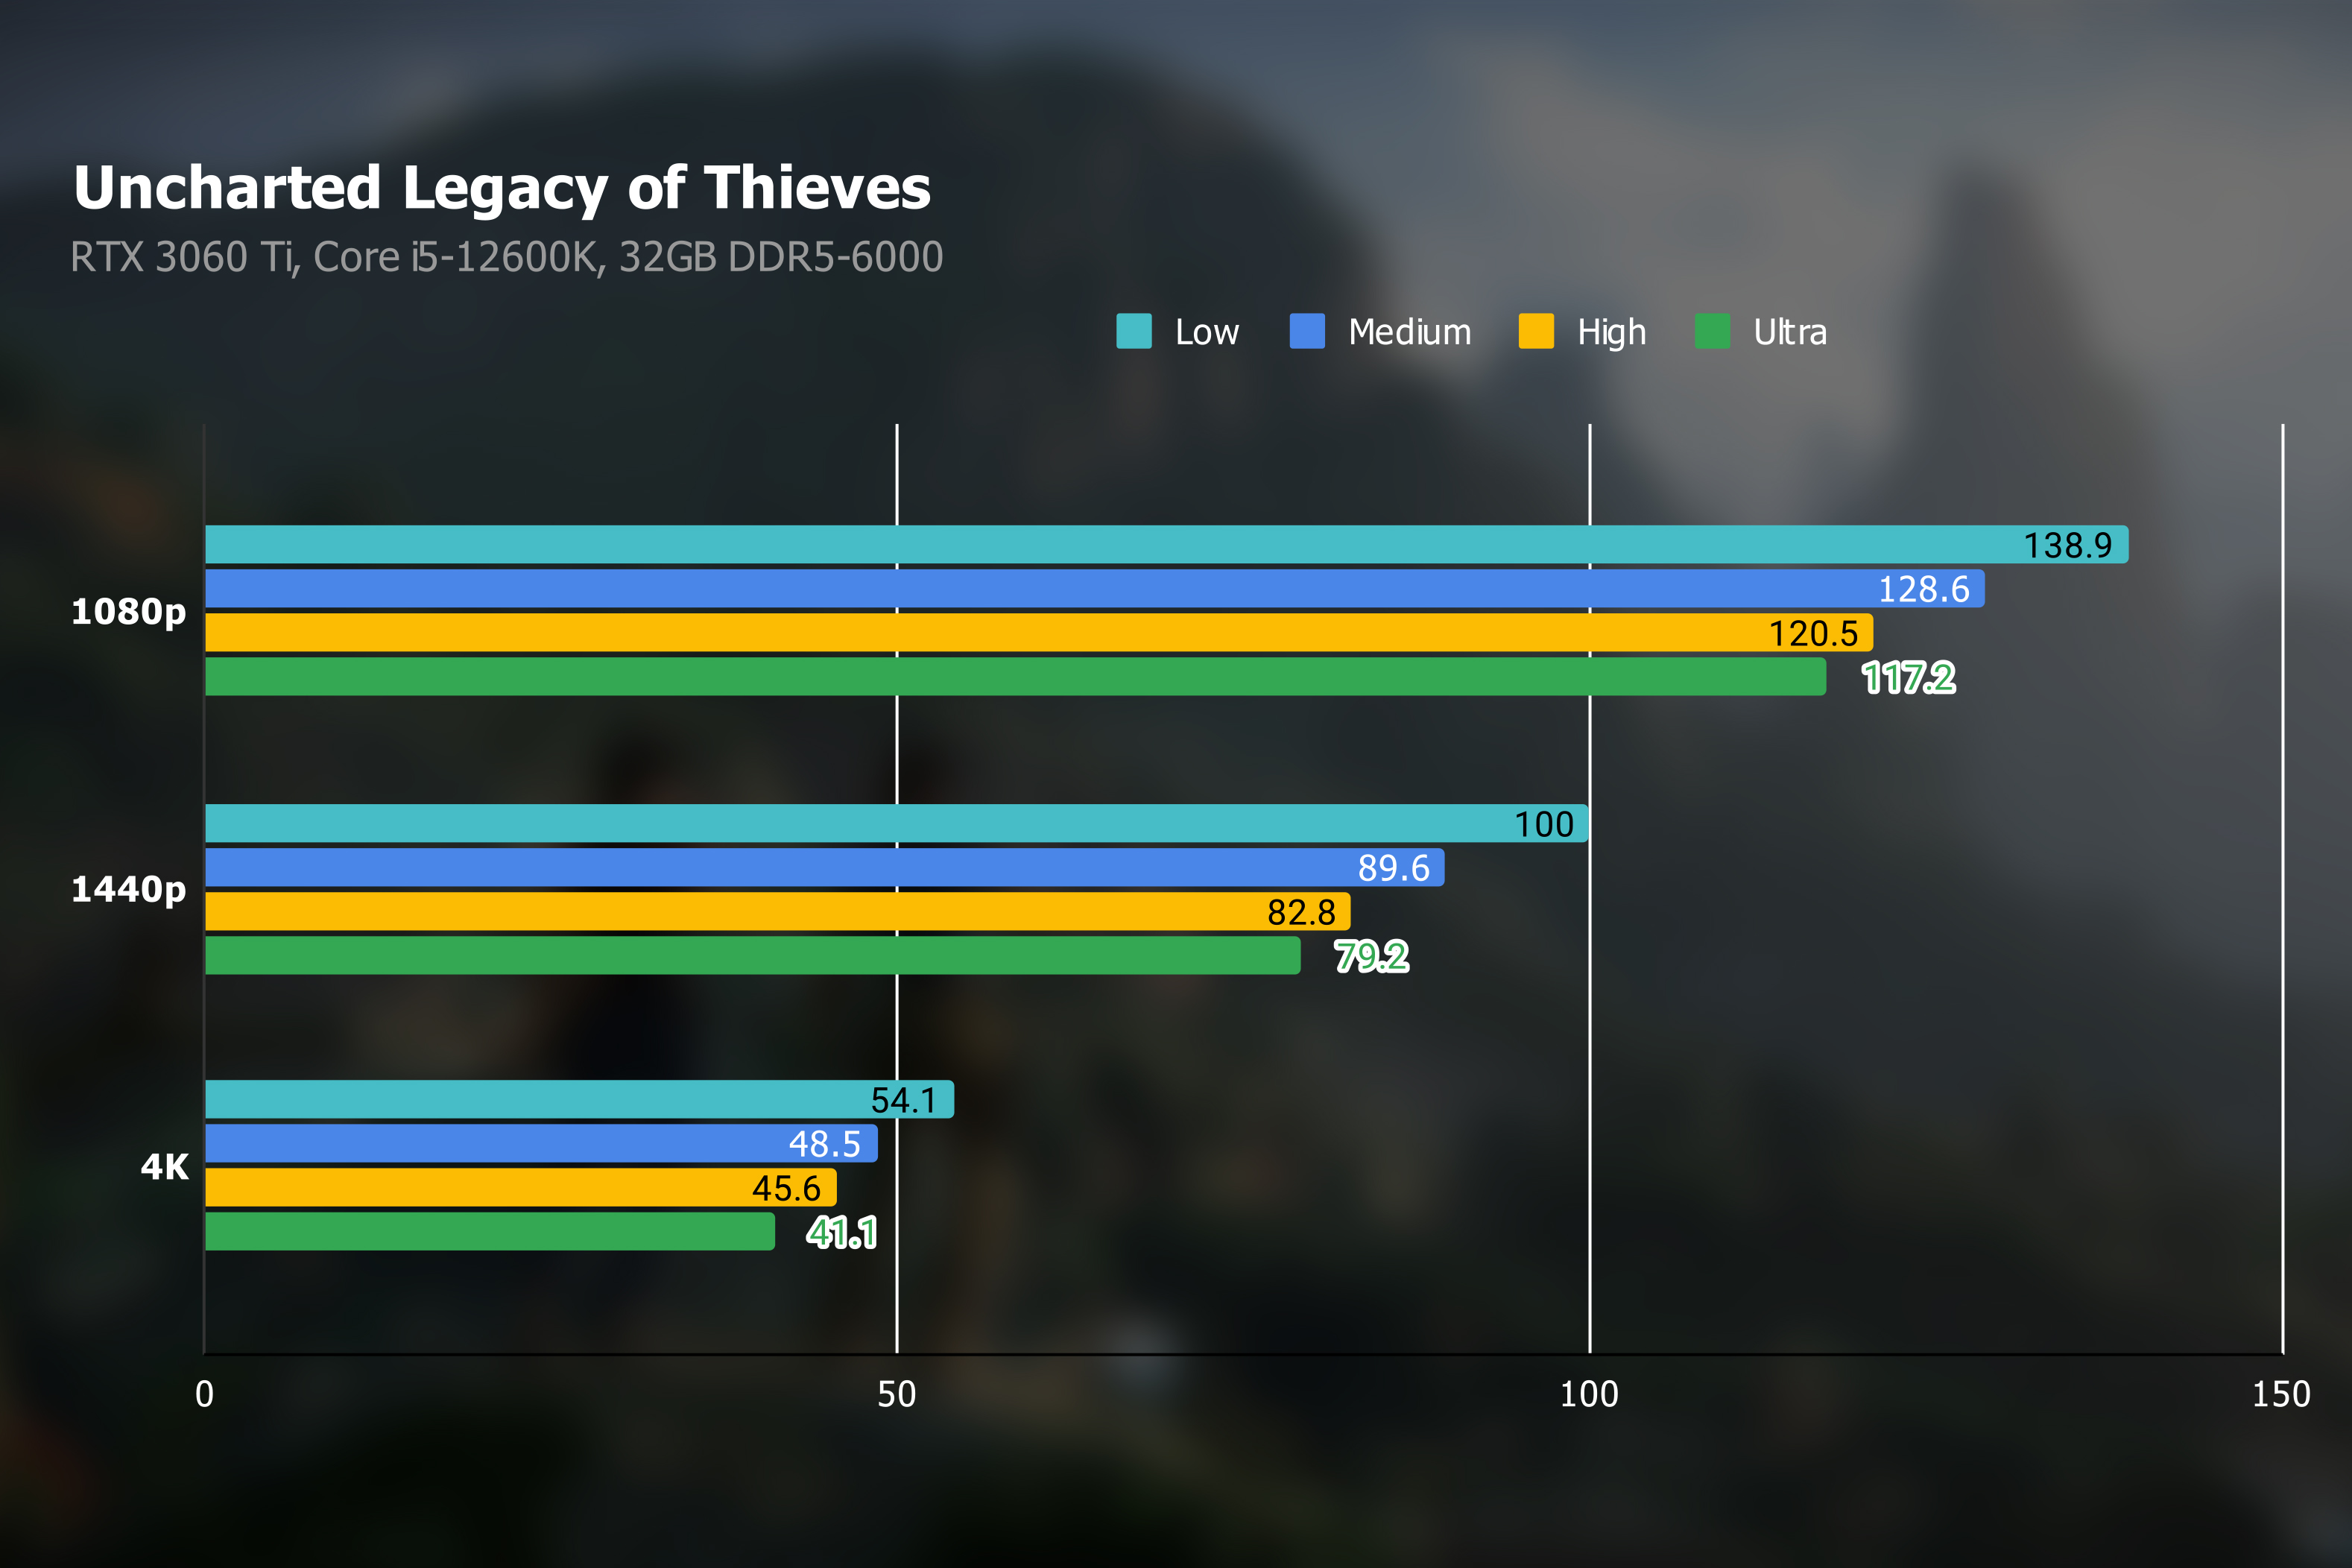 Uncharted: Legacy of Thieves Collection Review (PC) - Charting a